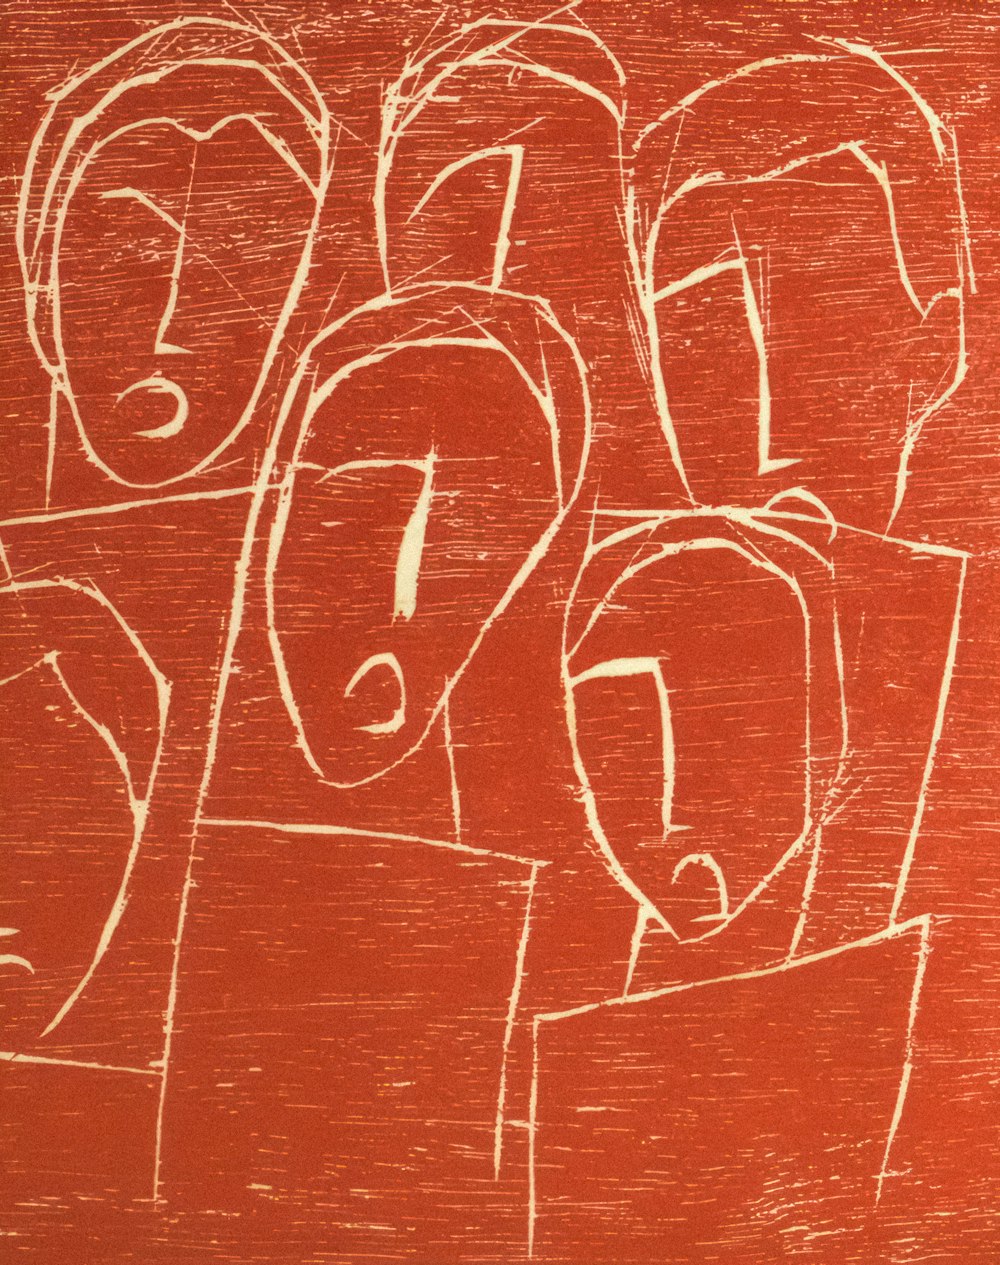 a drawing of a group of people on a red background